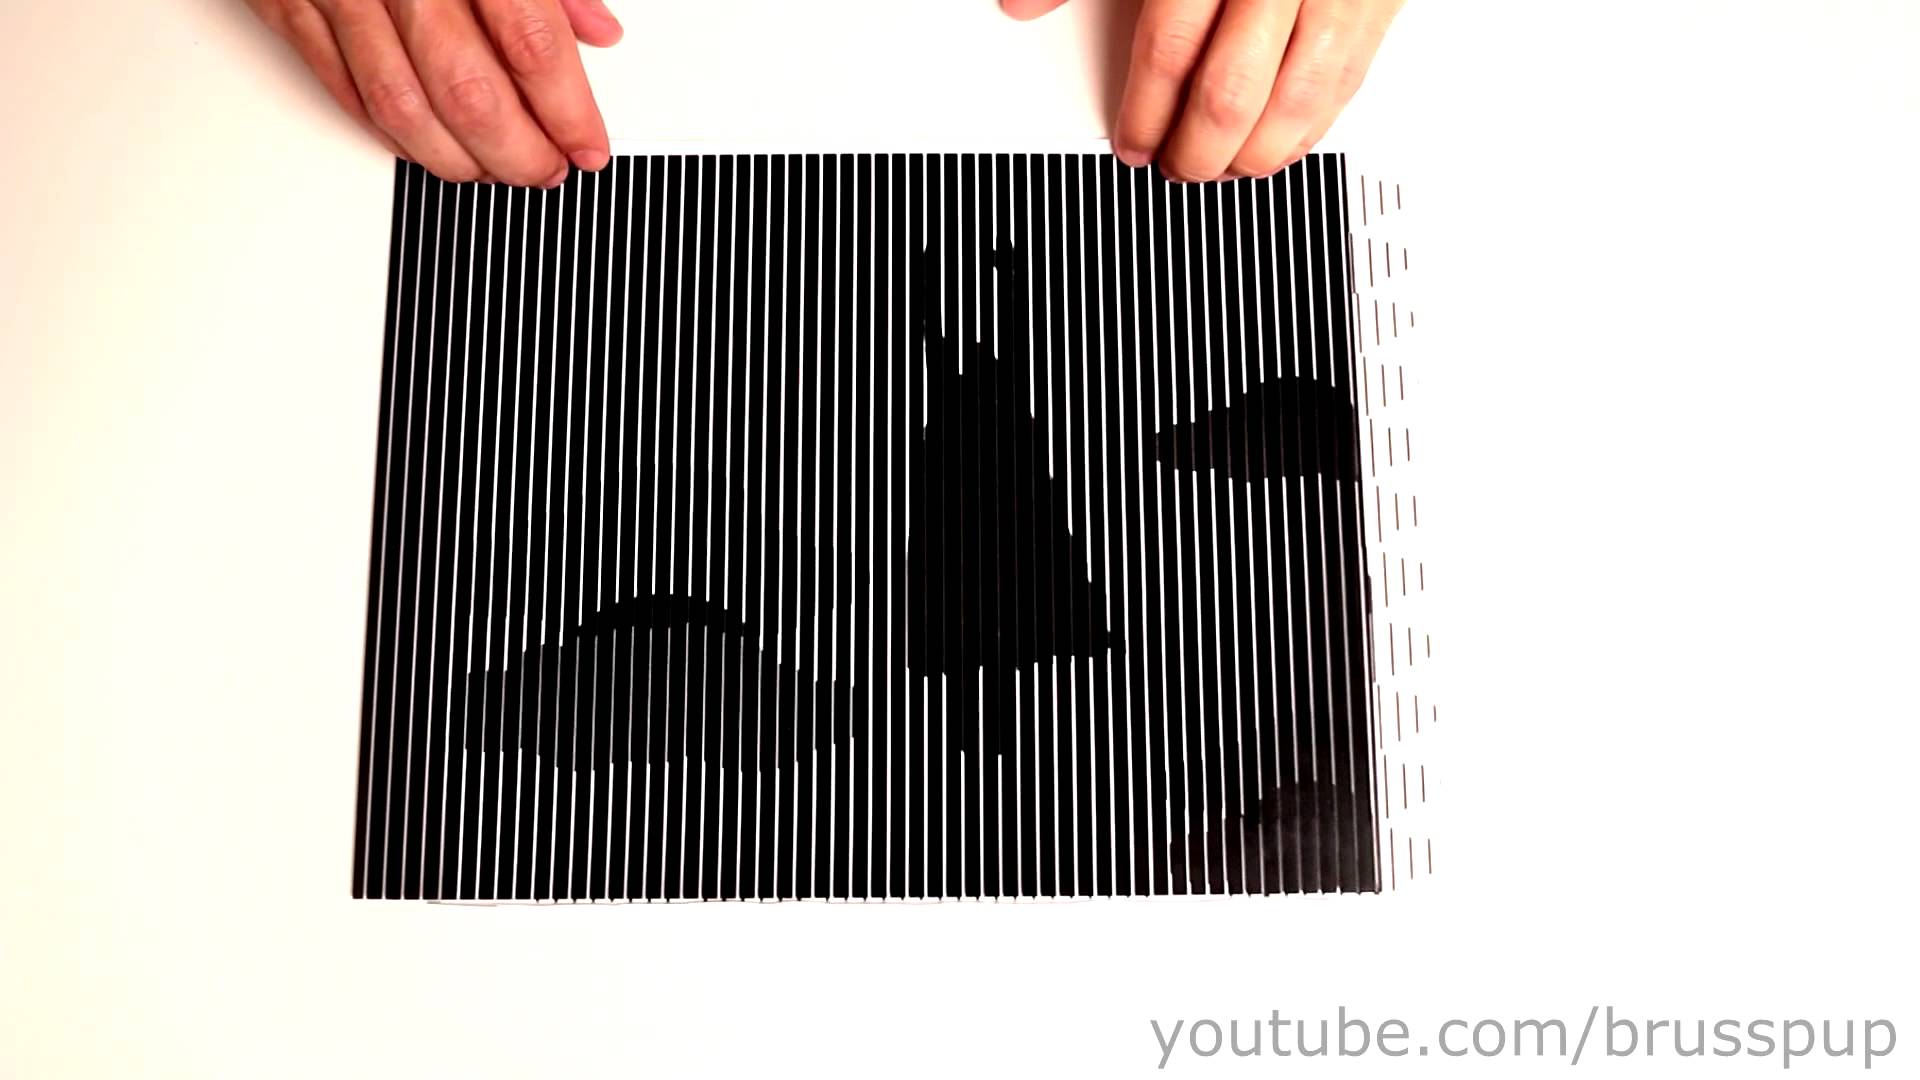 More Fantastic Animated Optical Illusions by Brusspup